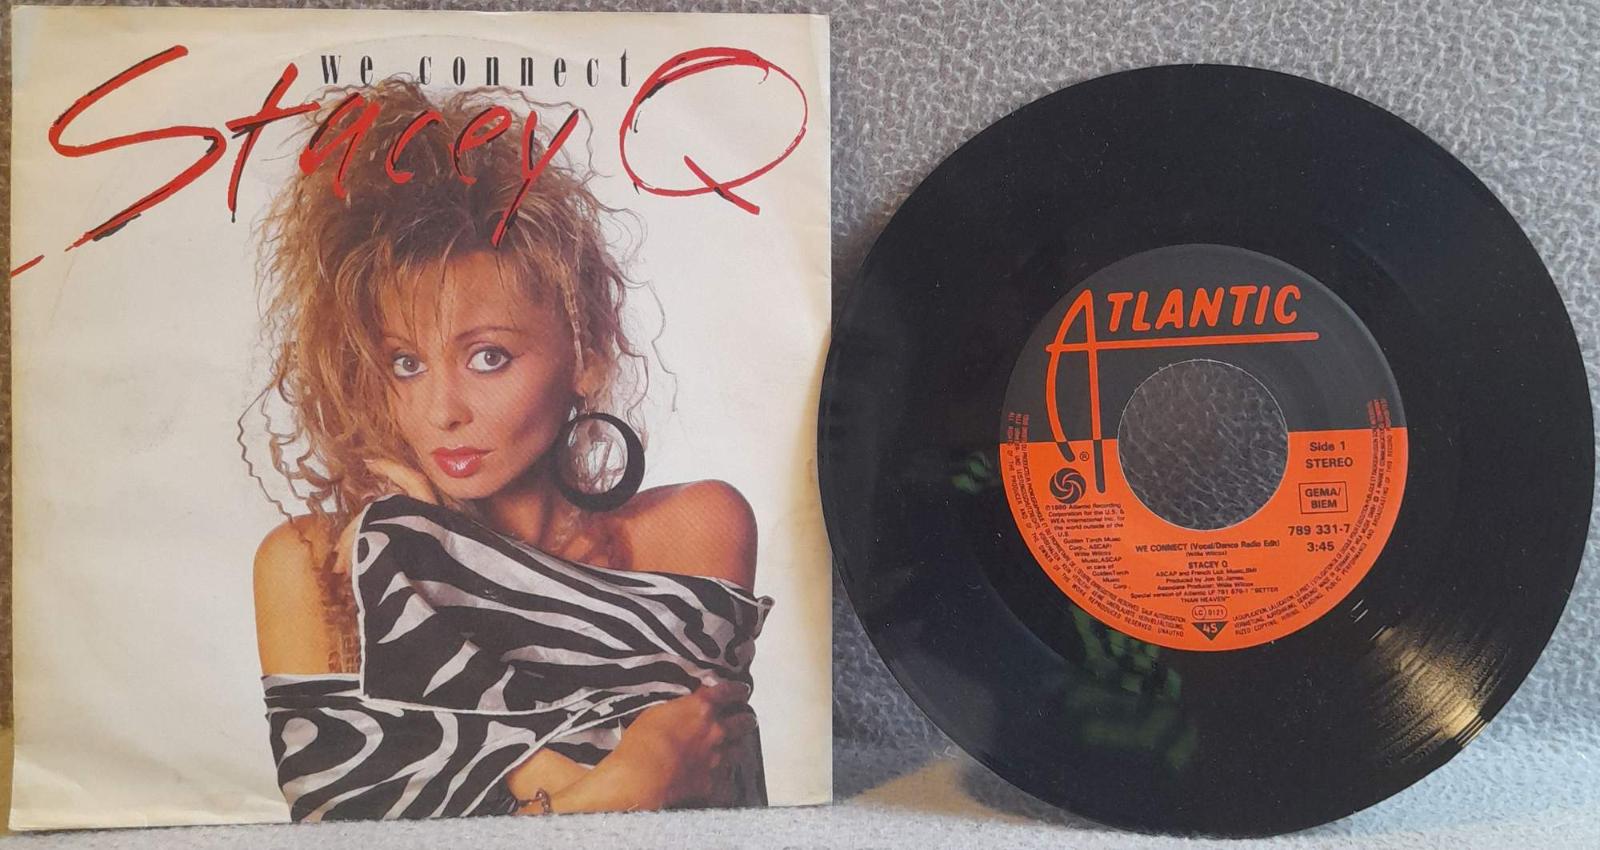 Stacey Q - We Connect, 1986 EX - Hudba